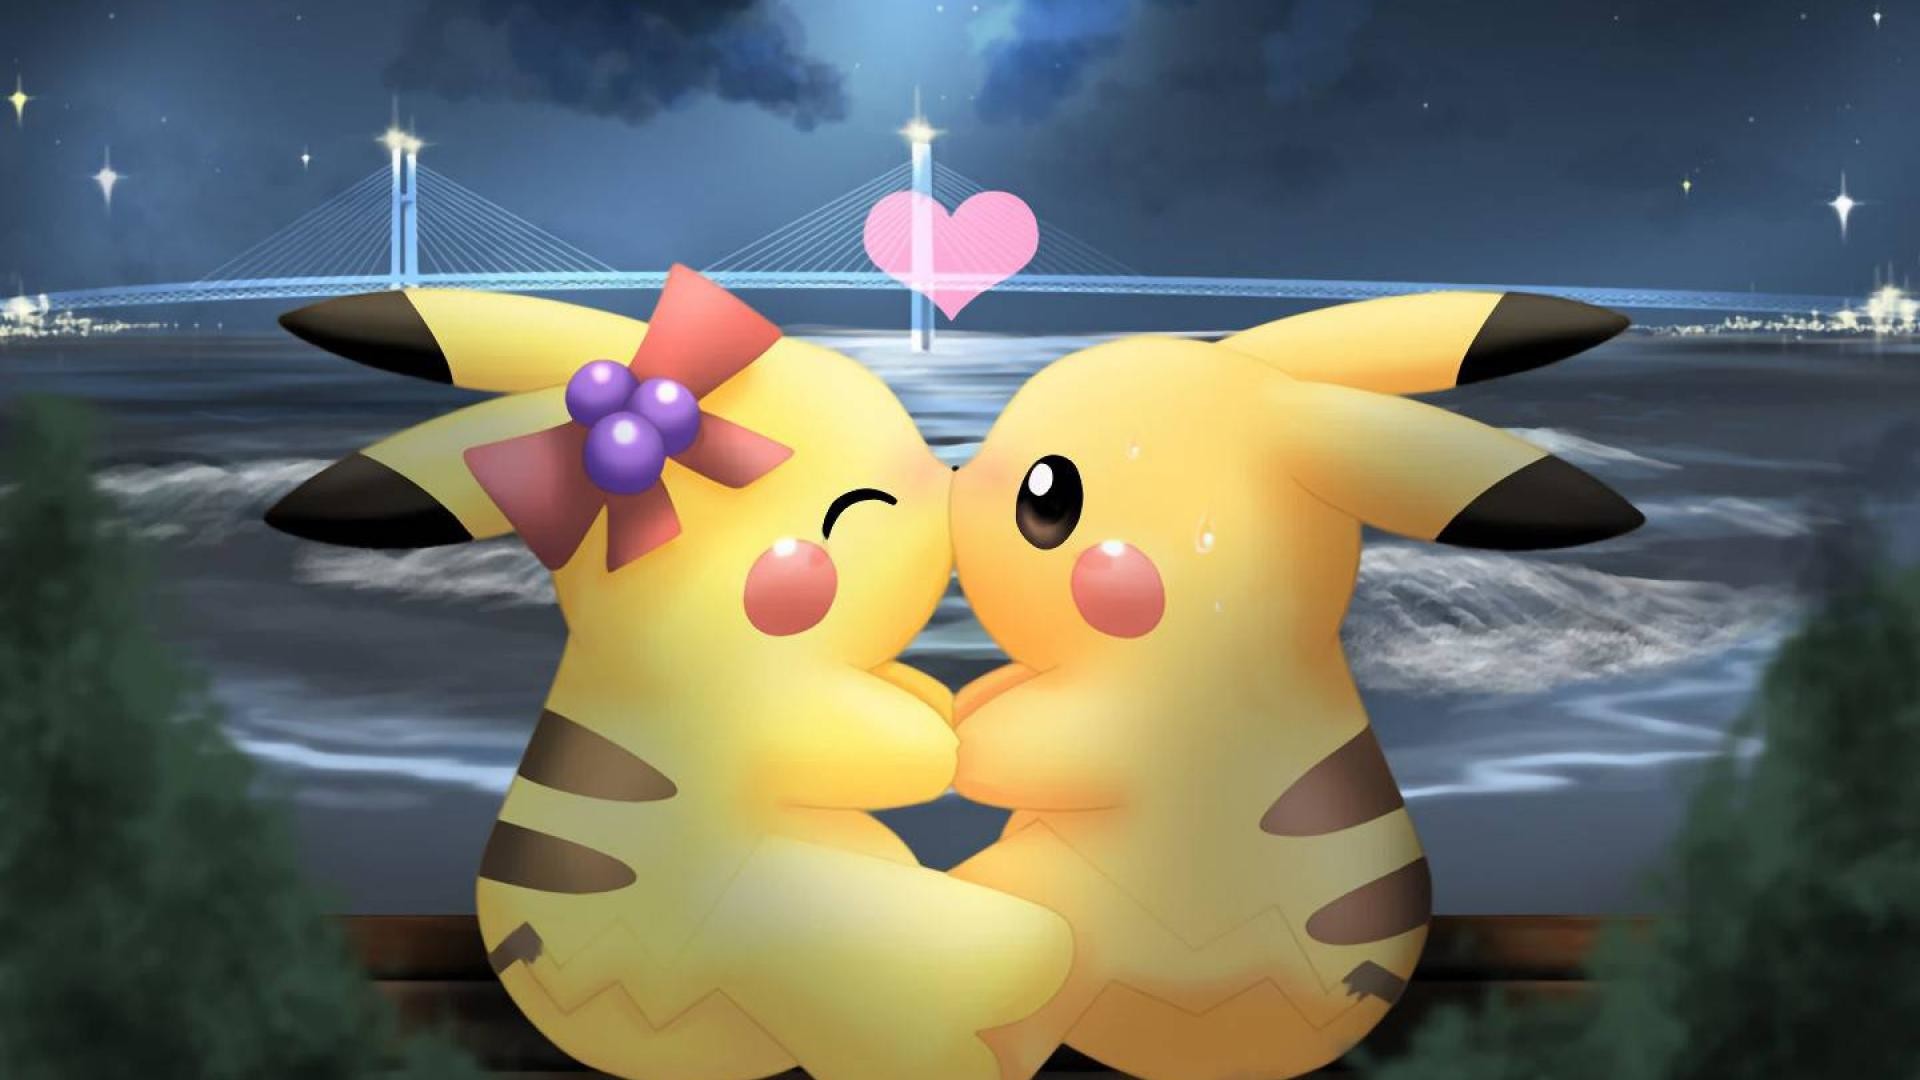 1920x1080 Love pikachu wallpaper - (#13983) - High Quality and Resolution .